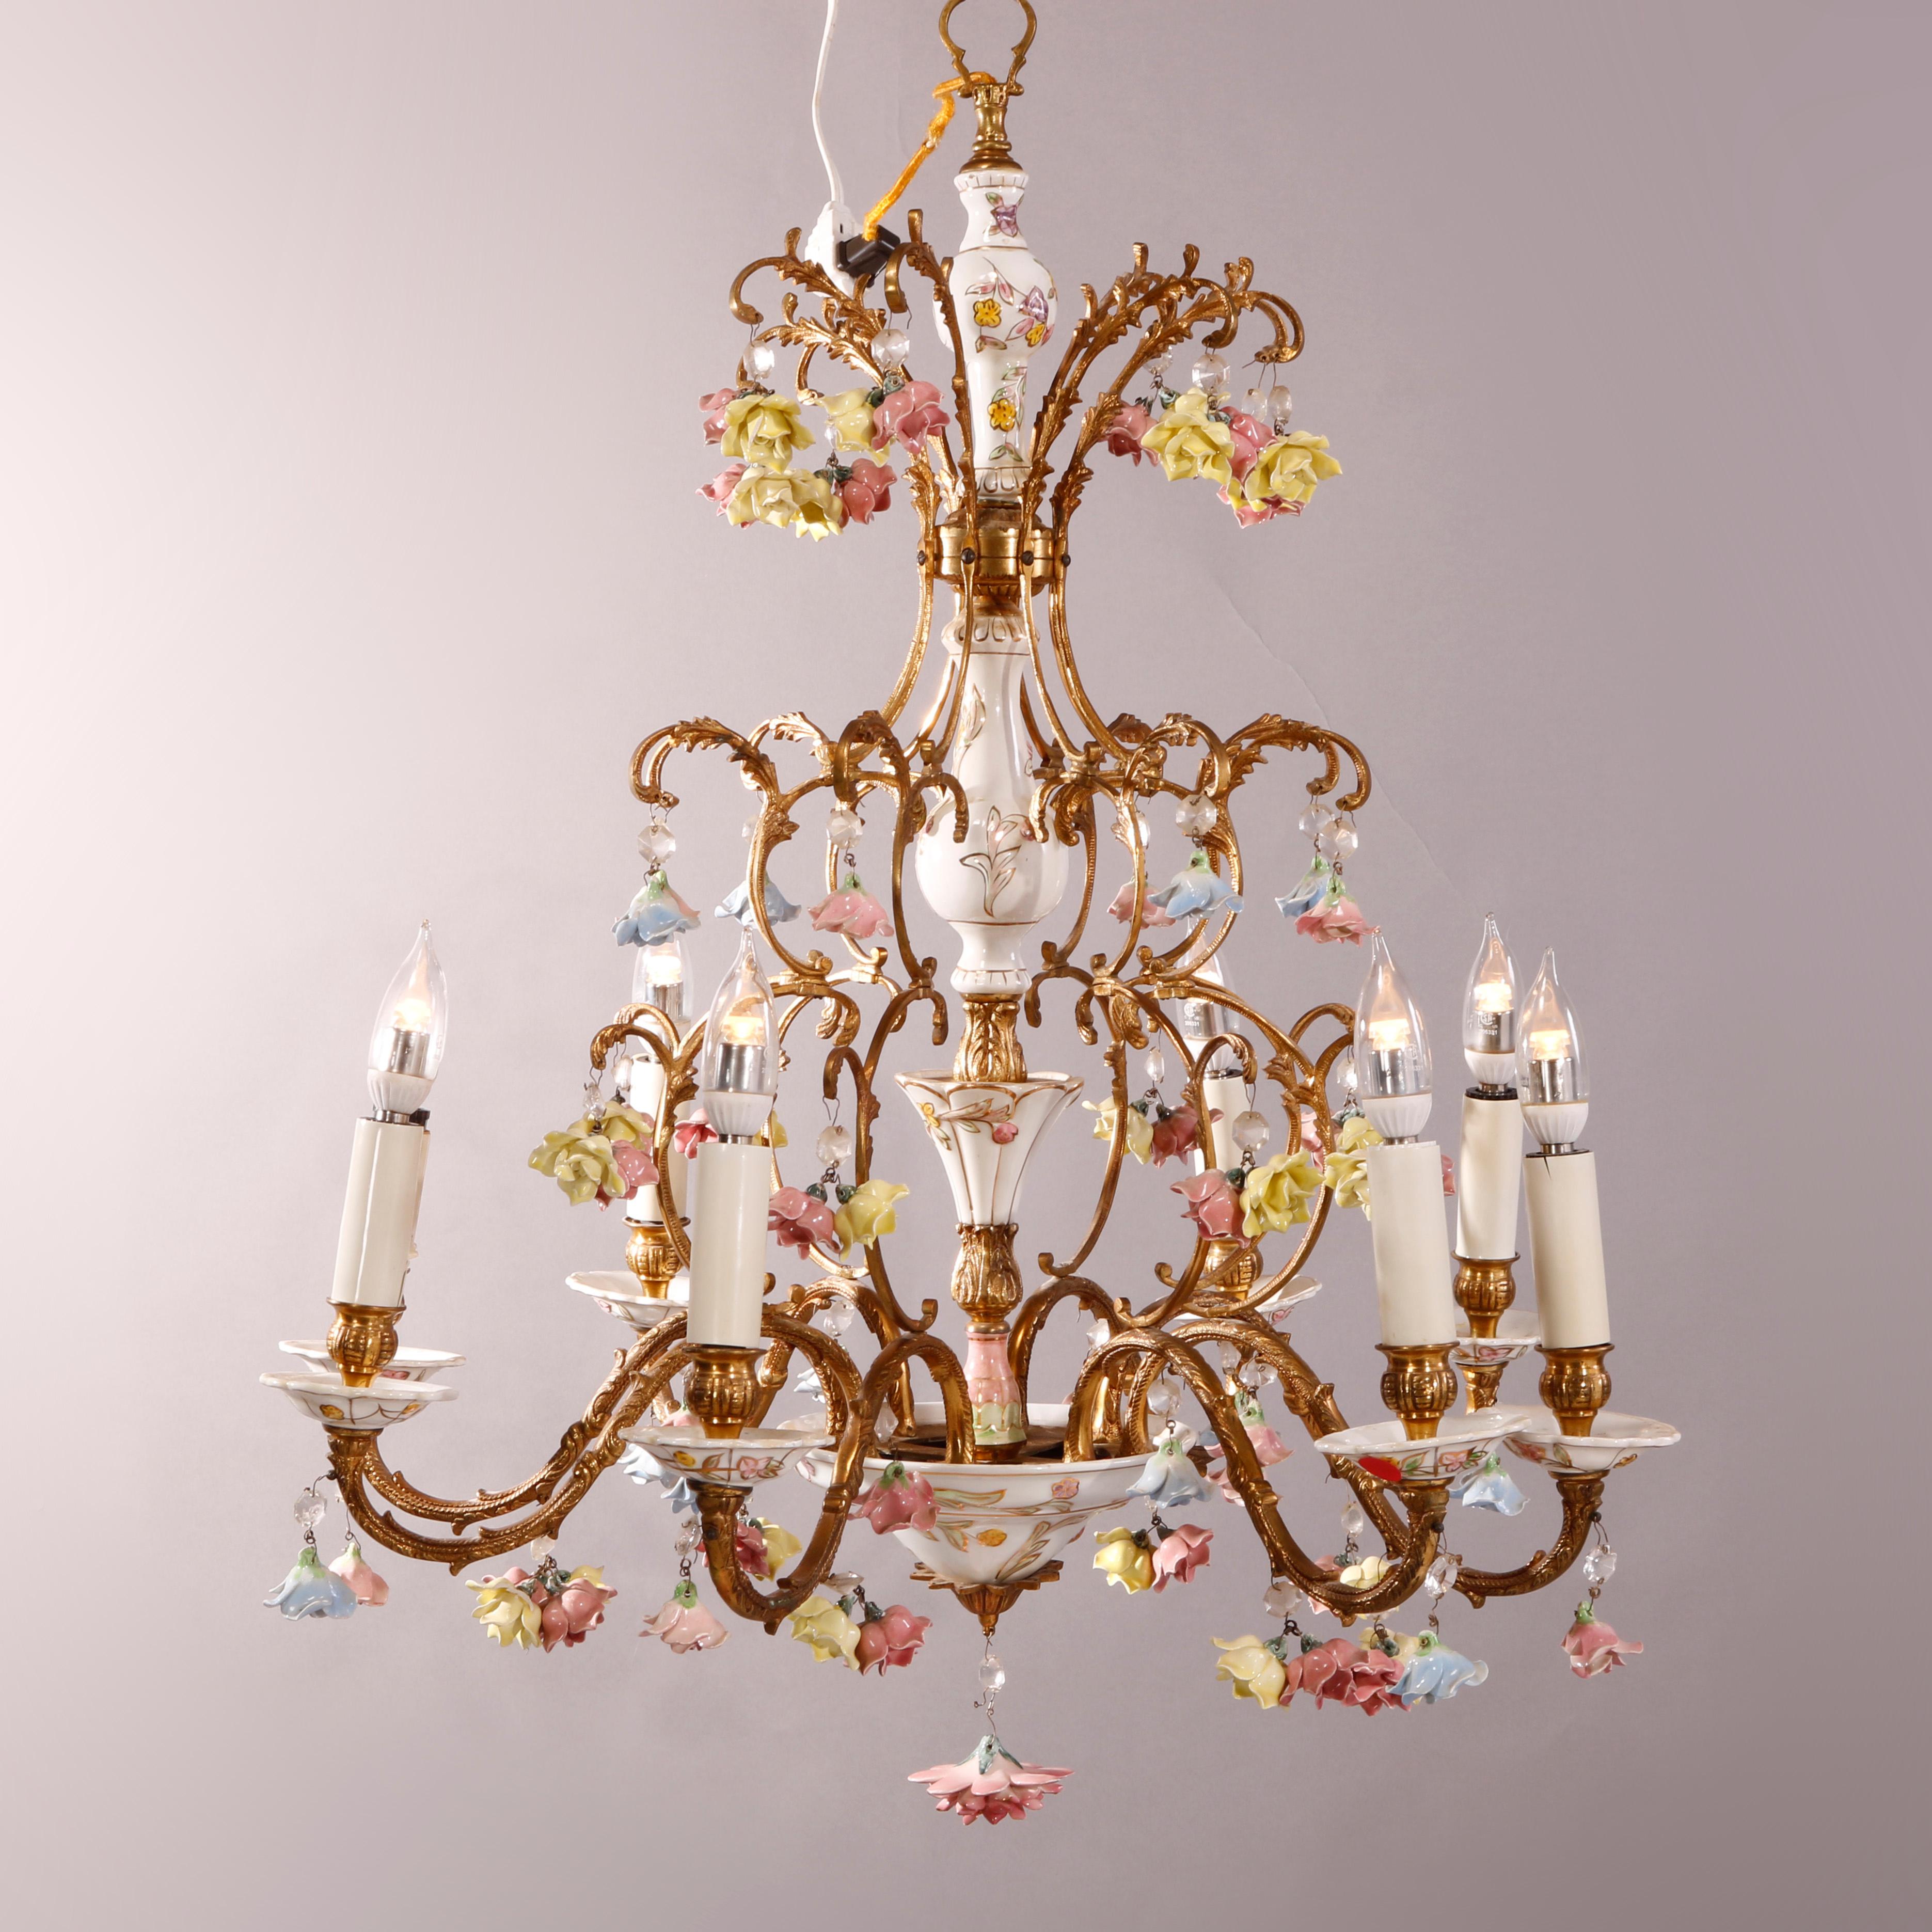 An antique Italian style chandelier offers gilt bronze foliate form frame with eight arms terminating in candle lights, hand painted and gilt porcelain inserts and flowers throughout, crystal highlights, 20th century

Measures - 33.5'' H x 22.5'' W